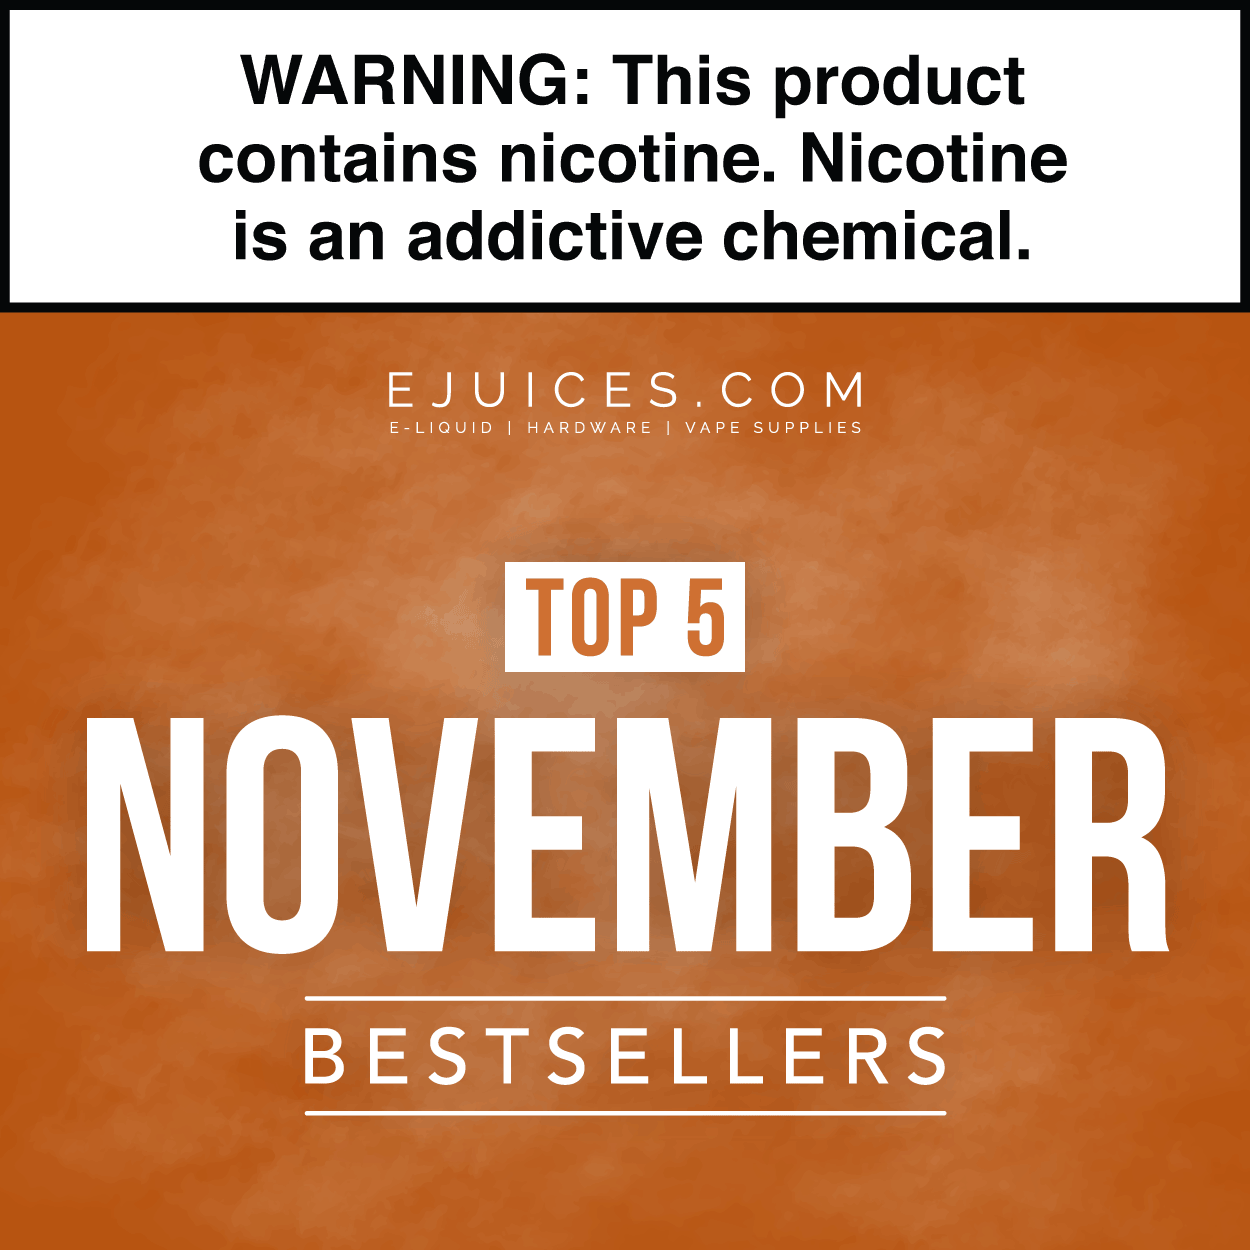 Top 5 Products for November 2020